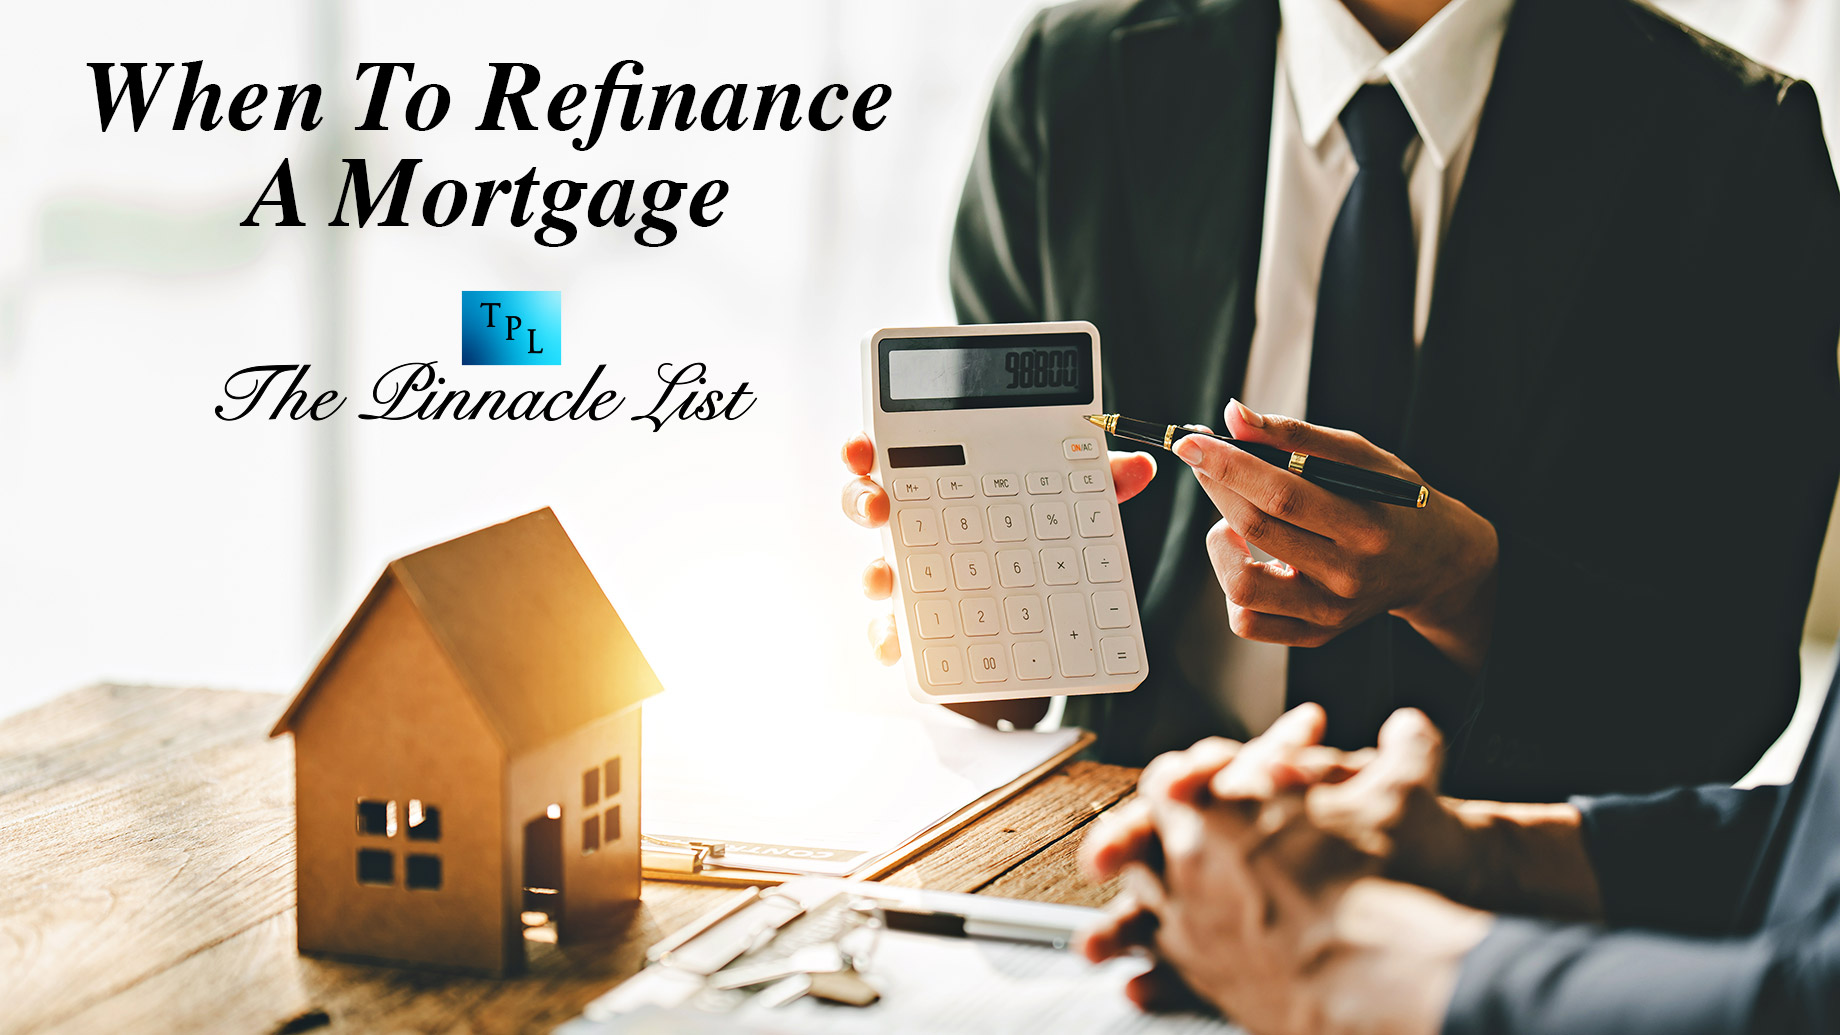 When To Refinance A Mortgage